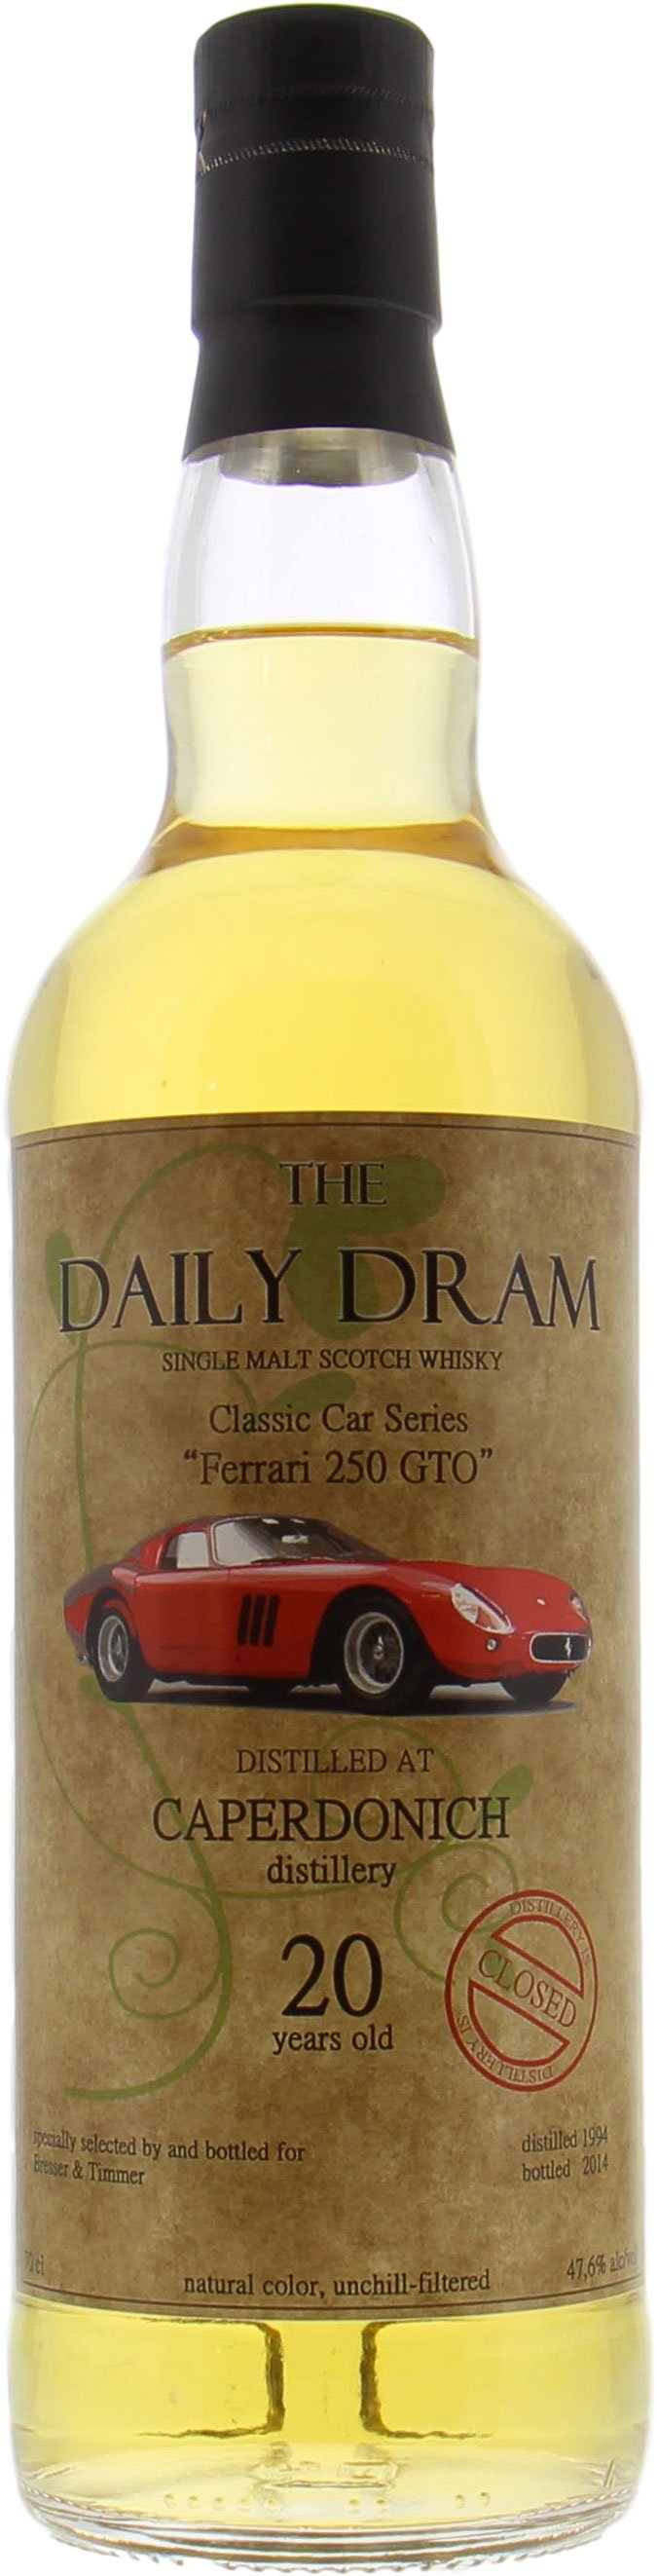 Caperdonich - 20 Years Old Daily Dram Classic Car Series 47.6% 1994 Perfect 10001